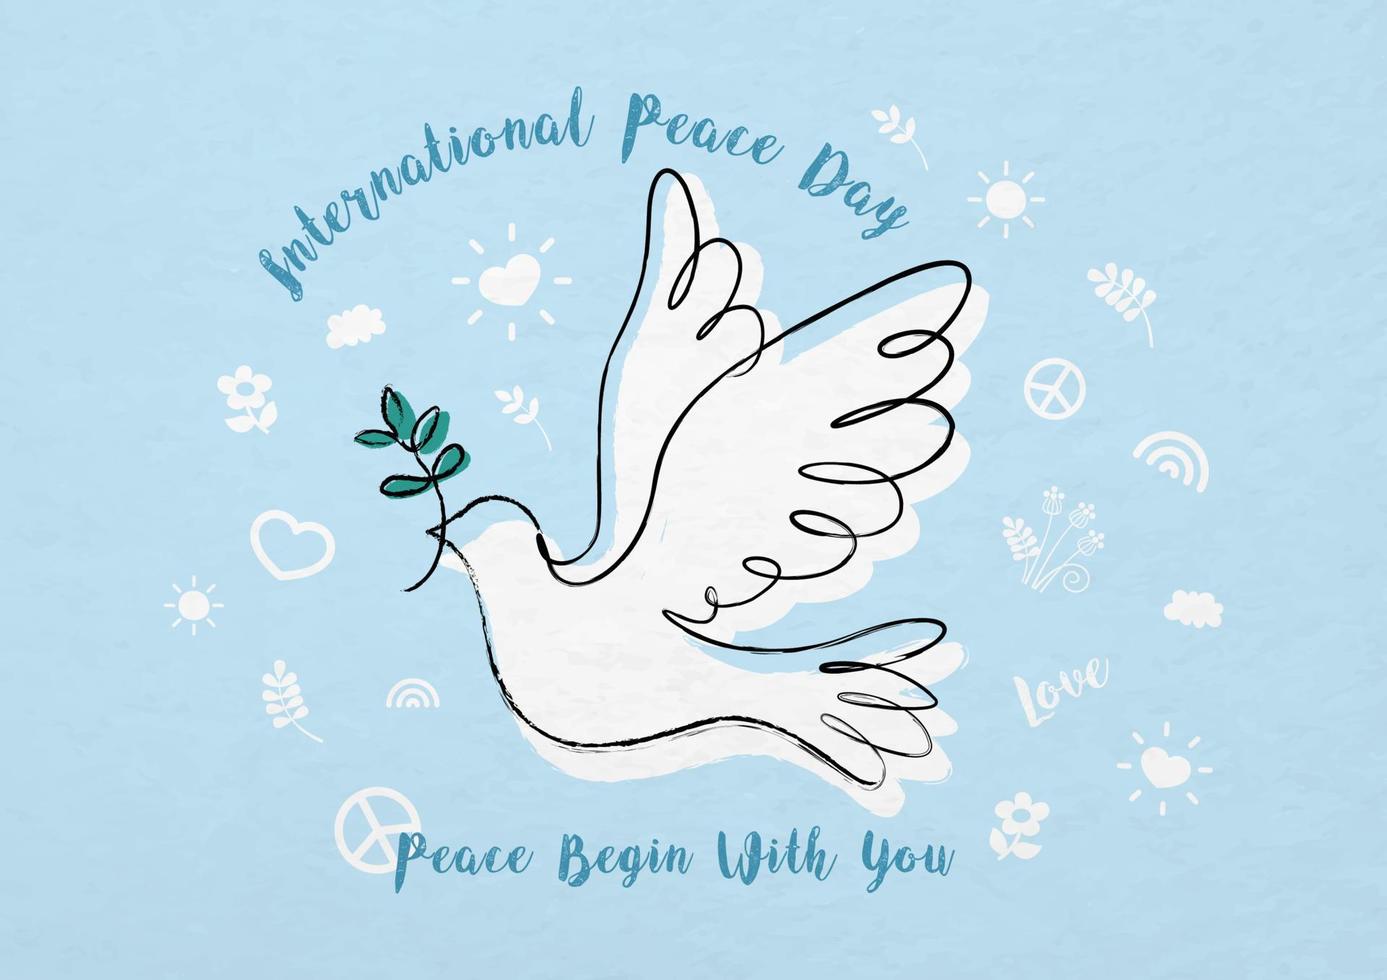 Hand draw and one line style in a peace dove shape with slogan and the name of event lettering on white peace day object pattern and blue background. vector